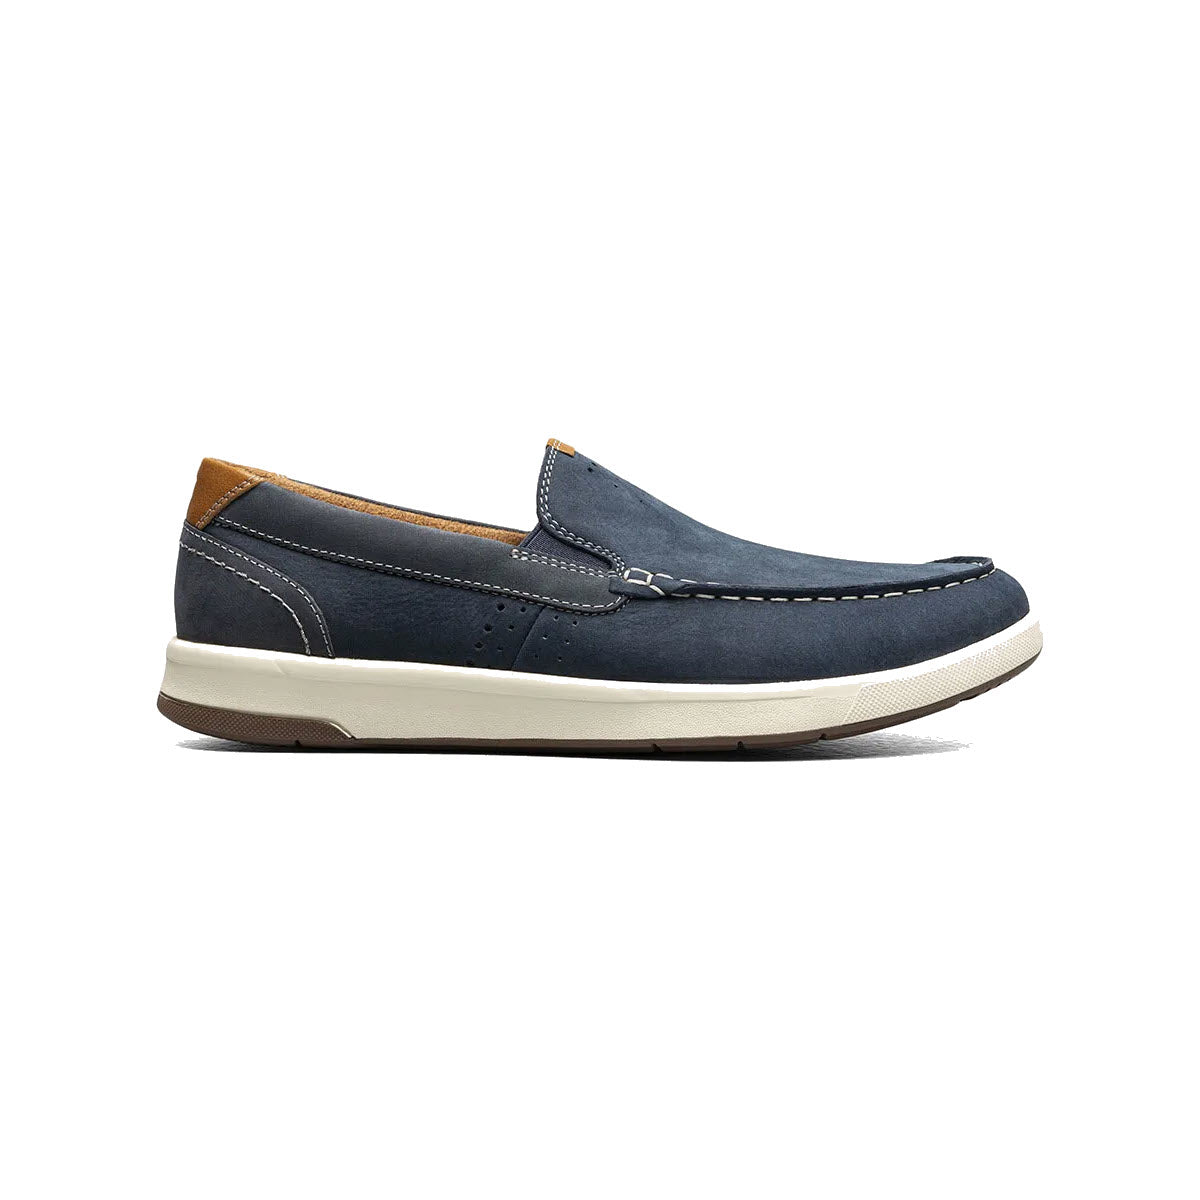 Side view of a single navy blue Florsheim FLORSHEIM CROSSOVER MOC TOE SLIP ON Sneaker with tan leather accents and a white rubber sole, displayed on a white background.